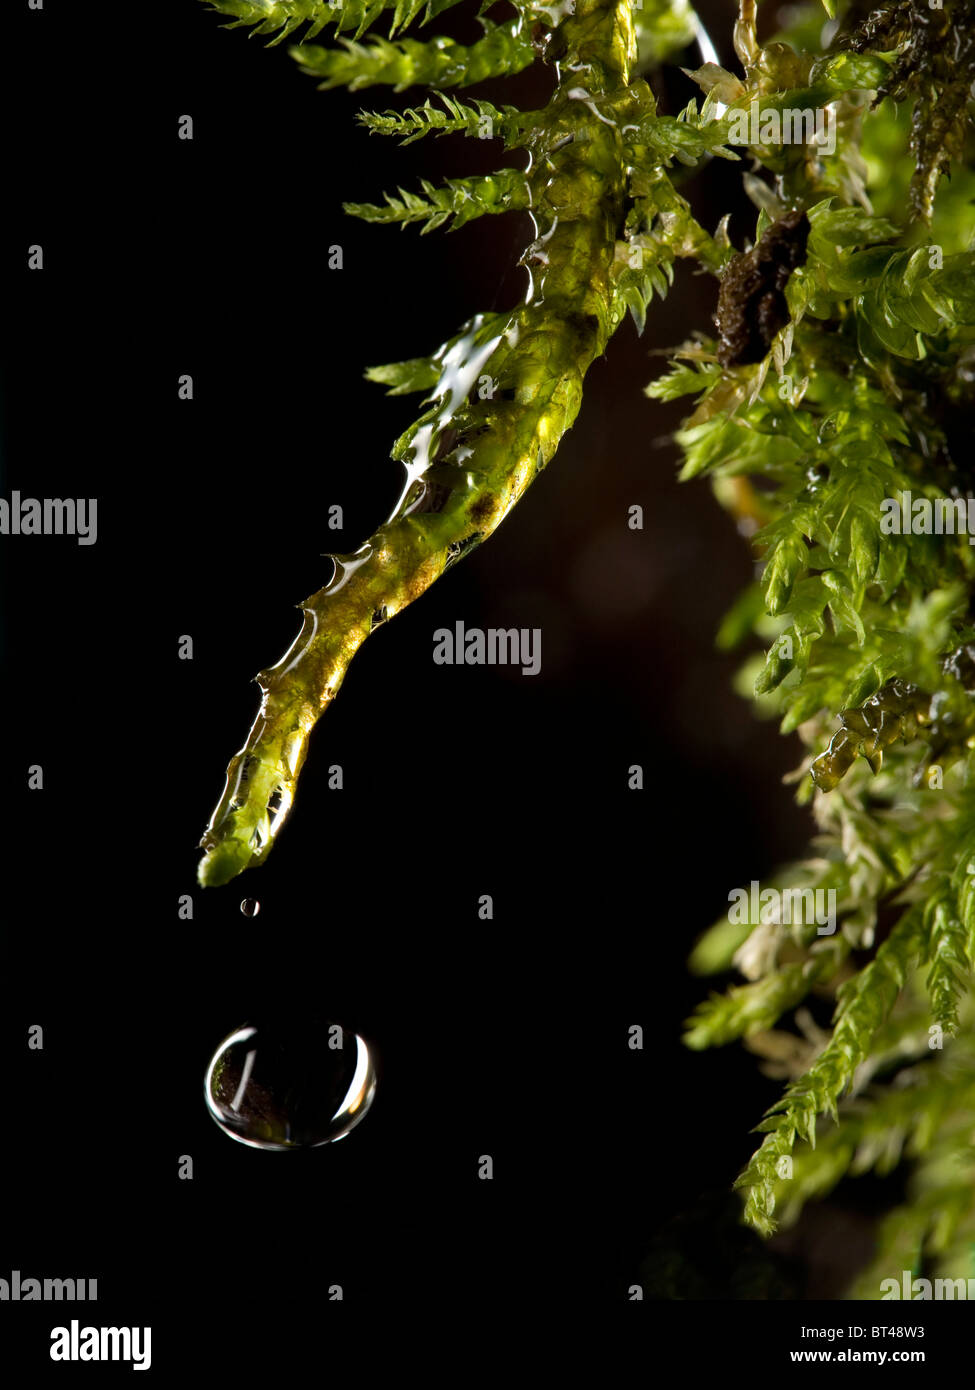 close up of drop of water dropping from a moss on black background Stock Photo